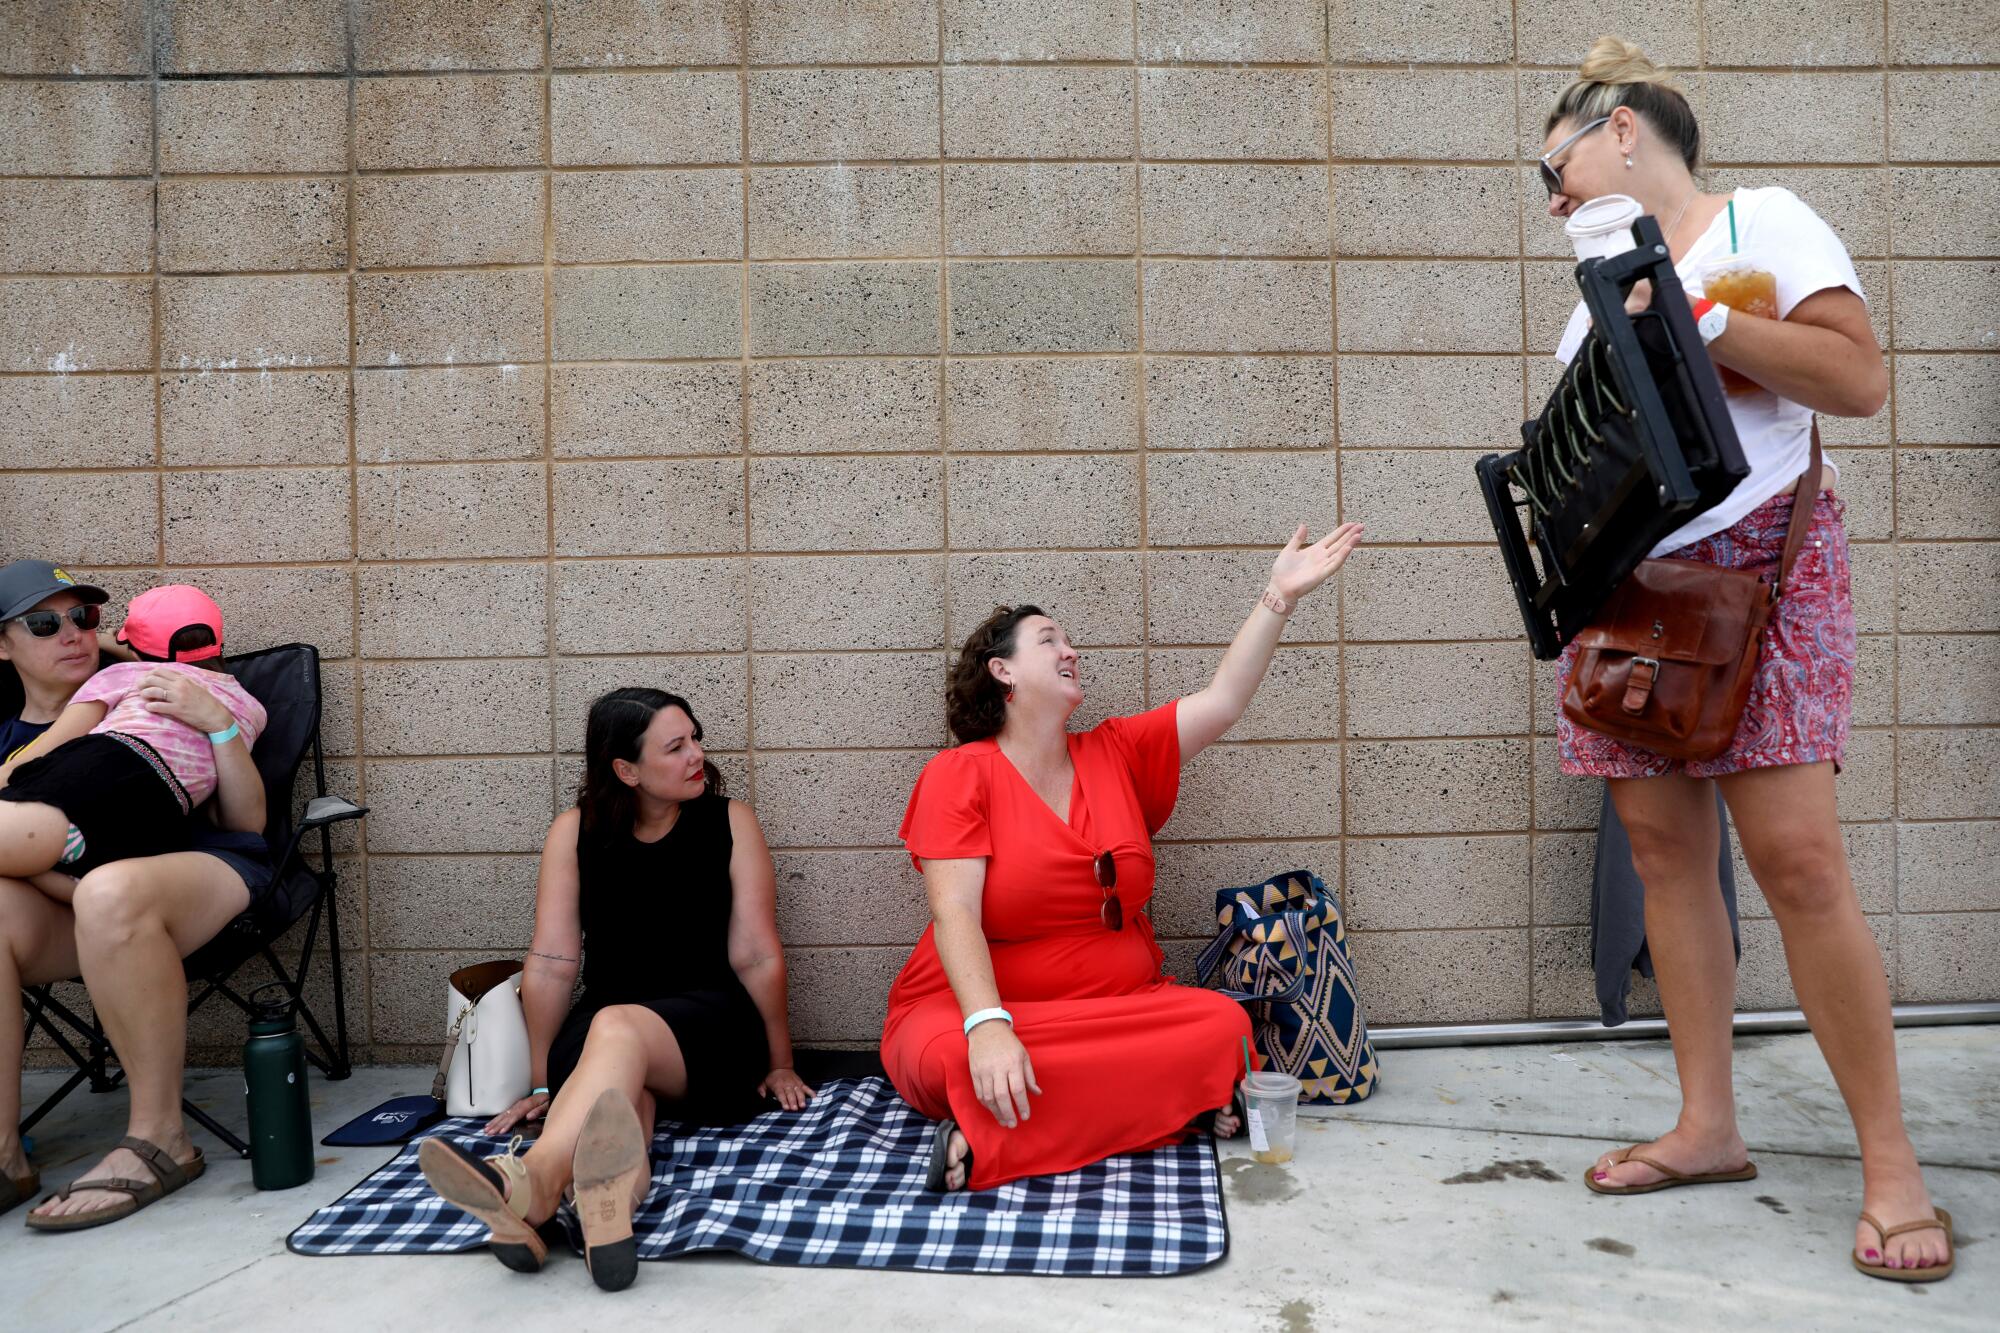 Katie Porter sits against a wall on a checkered blanket with a woman and gestures up to another woman standing next to them